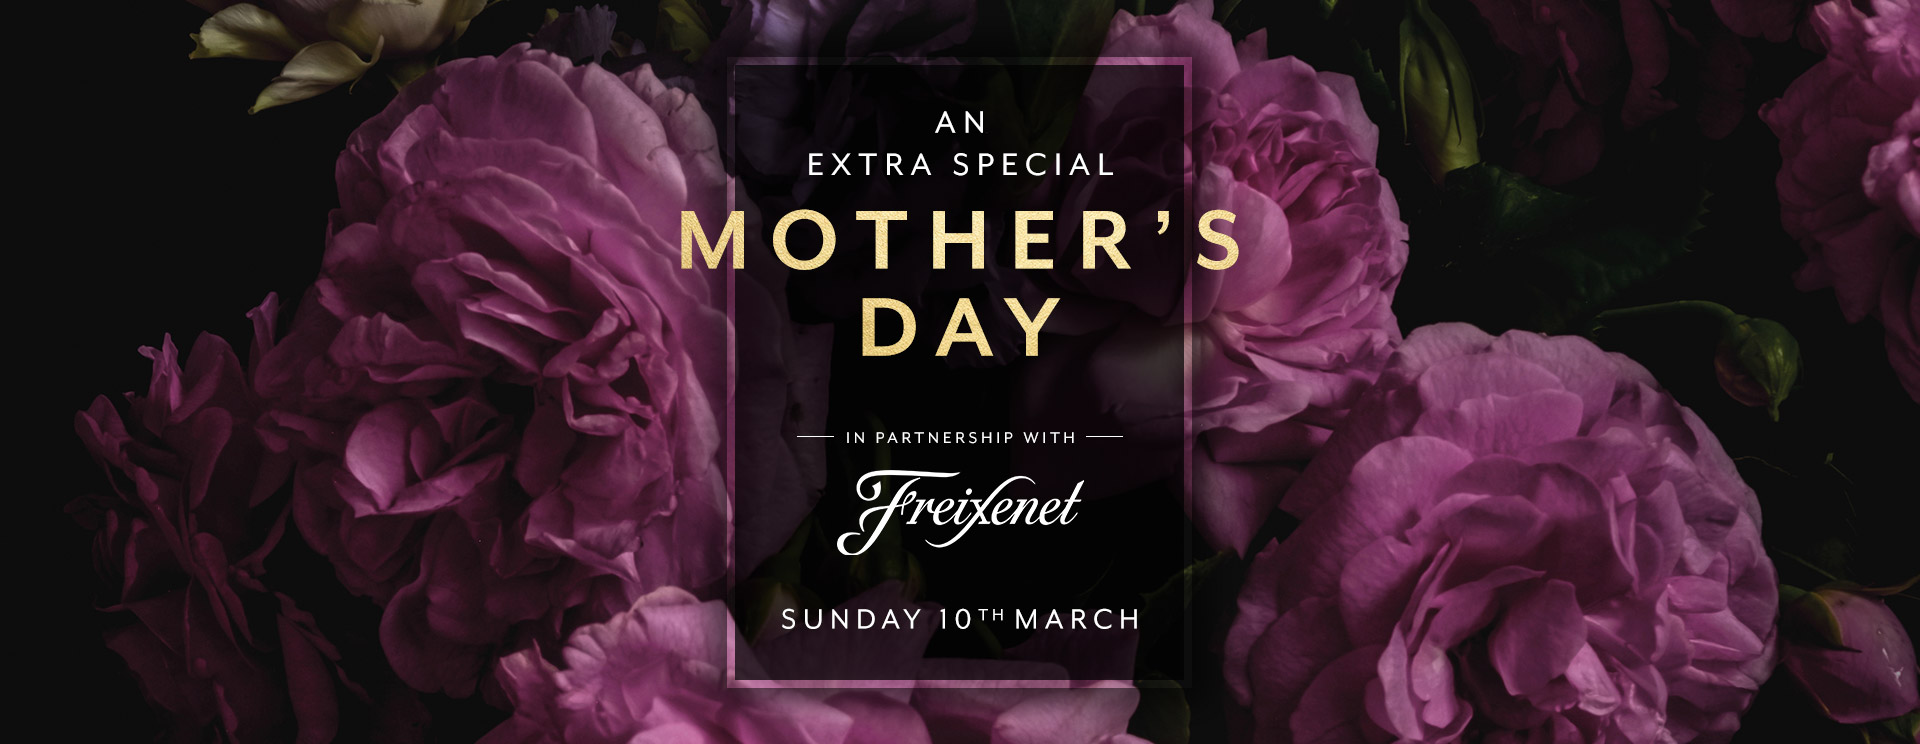 Mother’s Day menu/meal in Sutton Coldfield